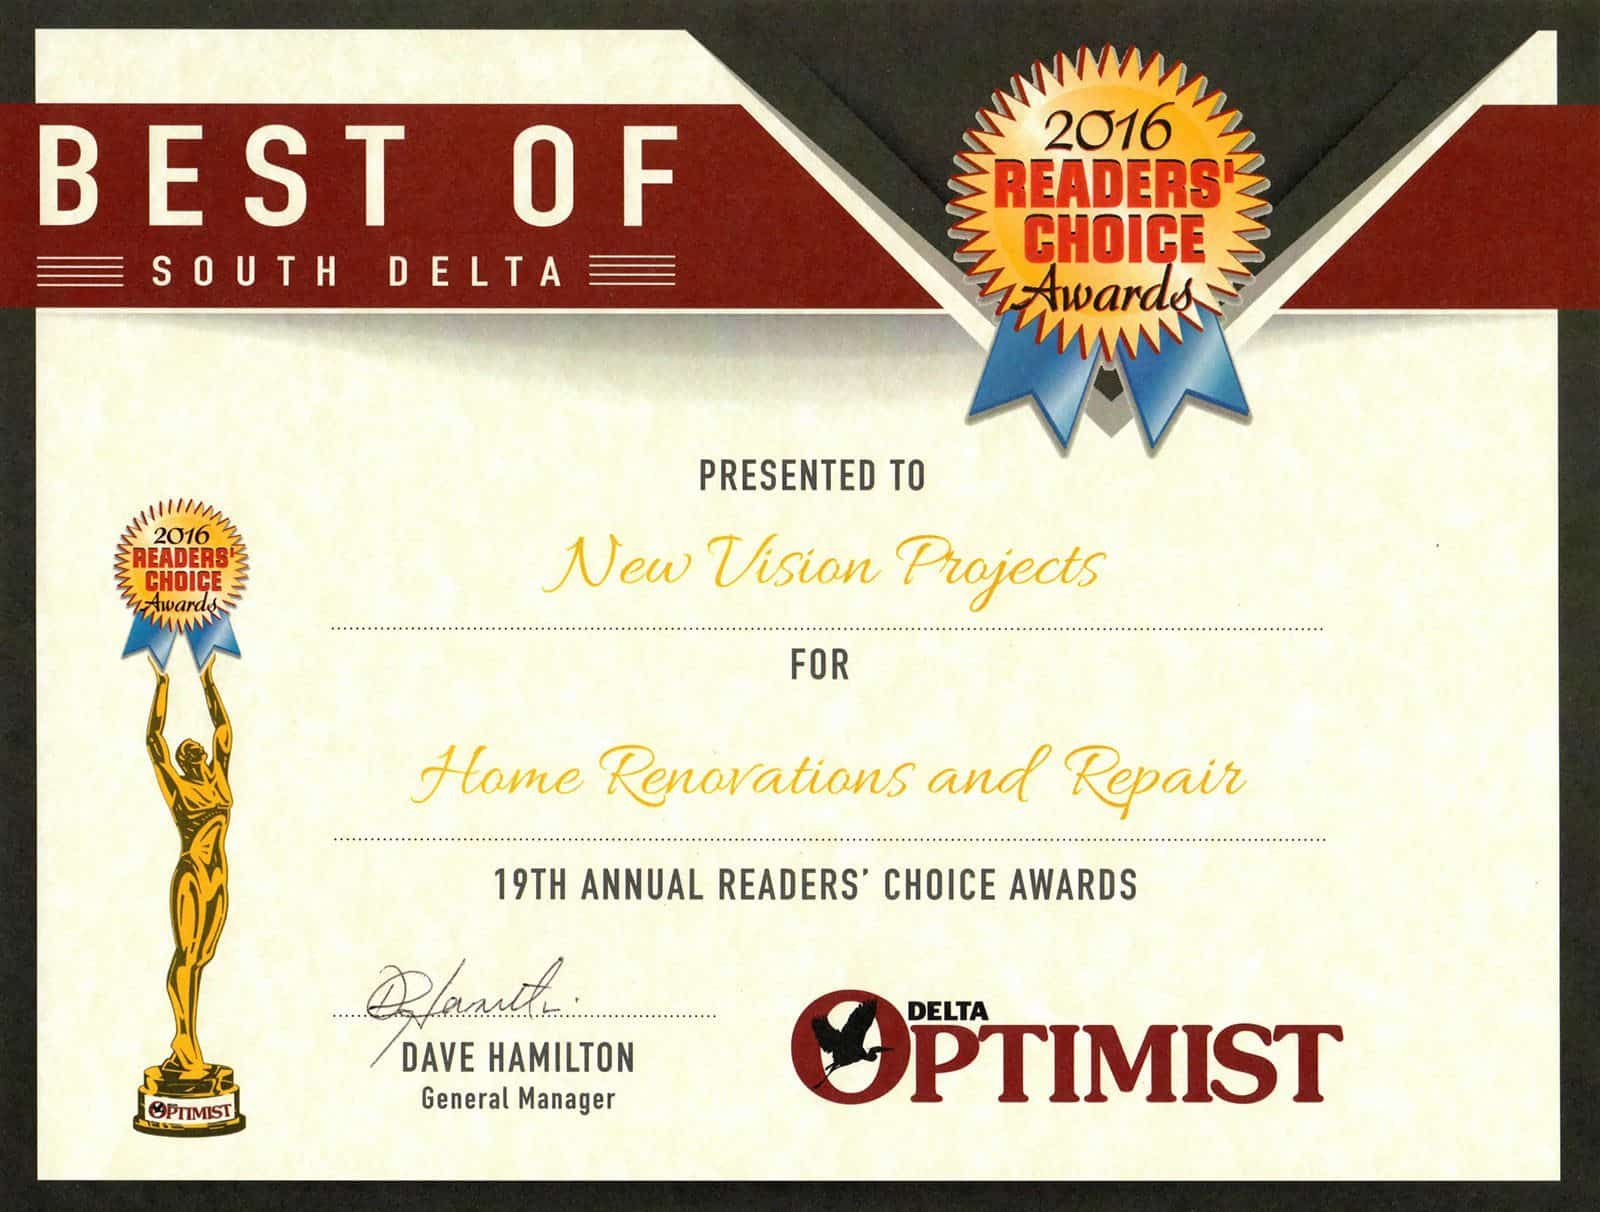 2016 Delta Optimist Readers Choice Awards – Best Home Renovations and Repair